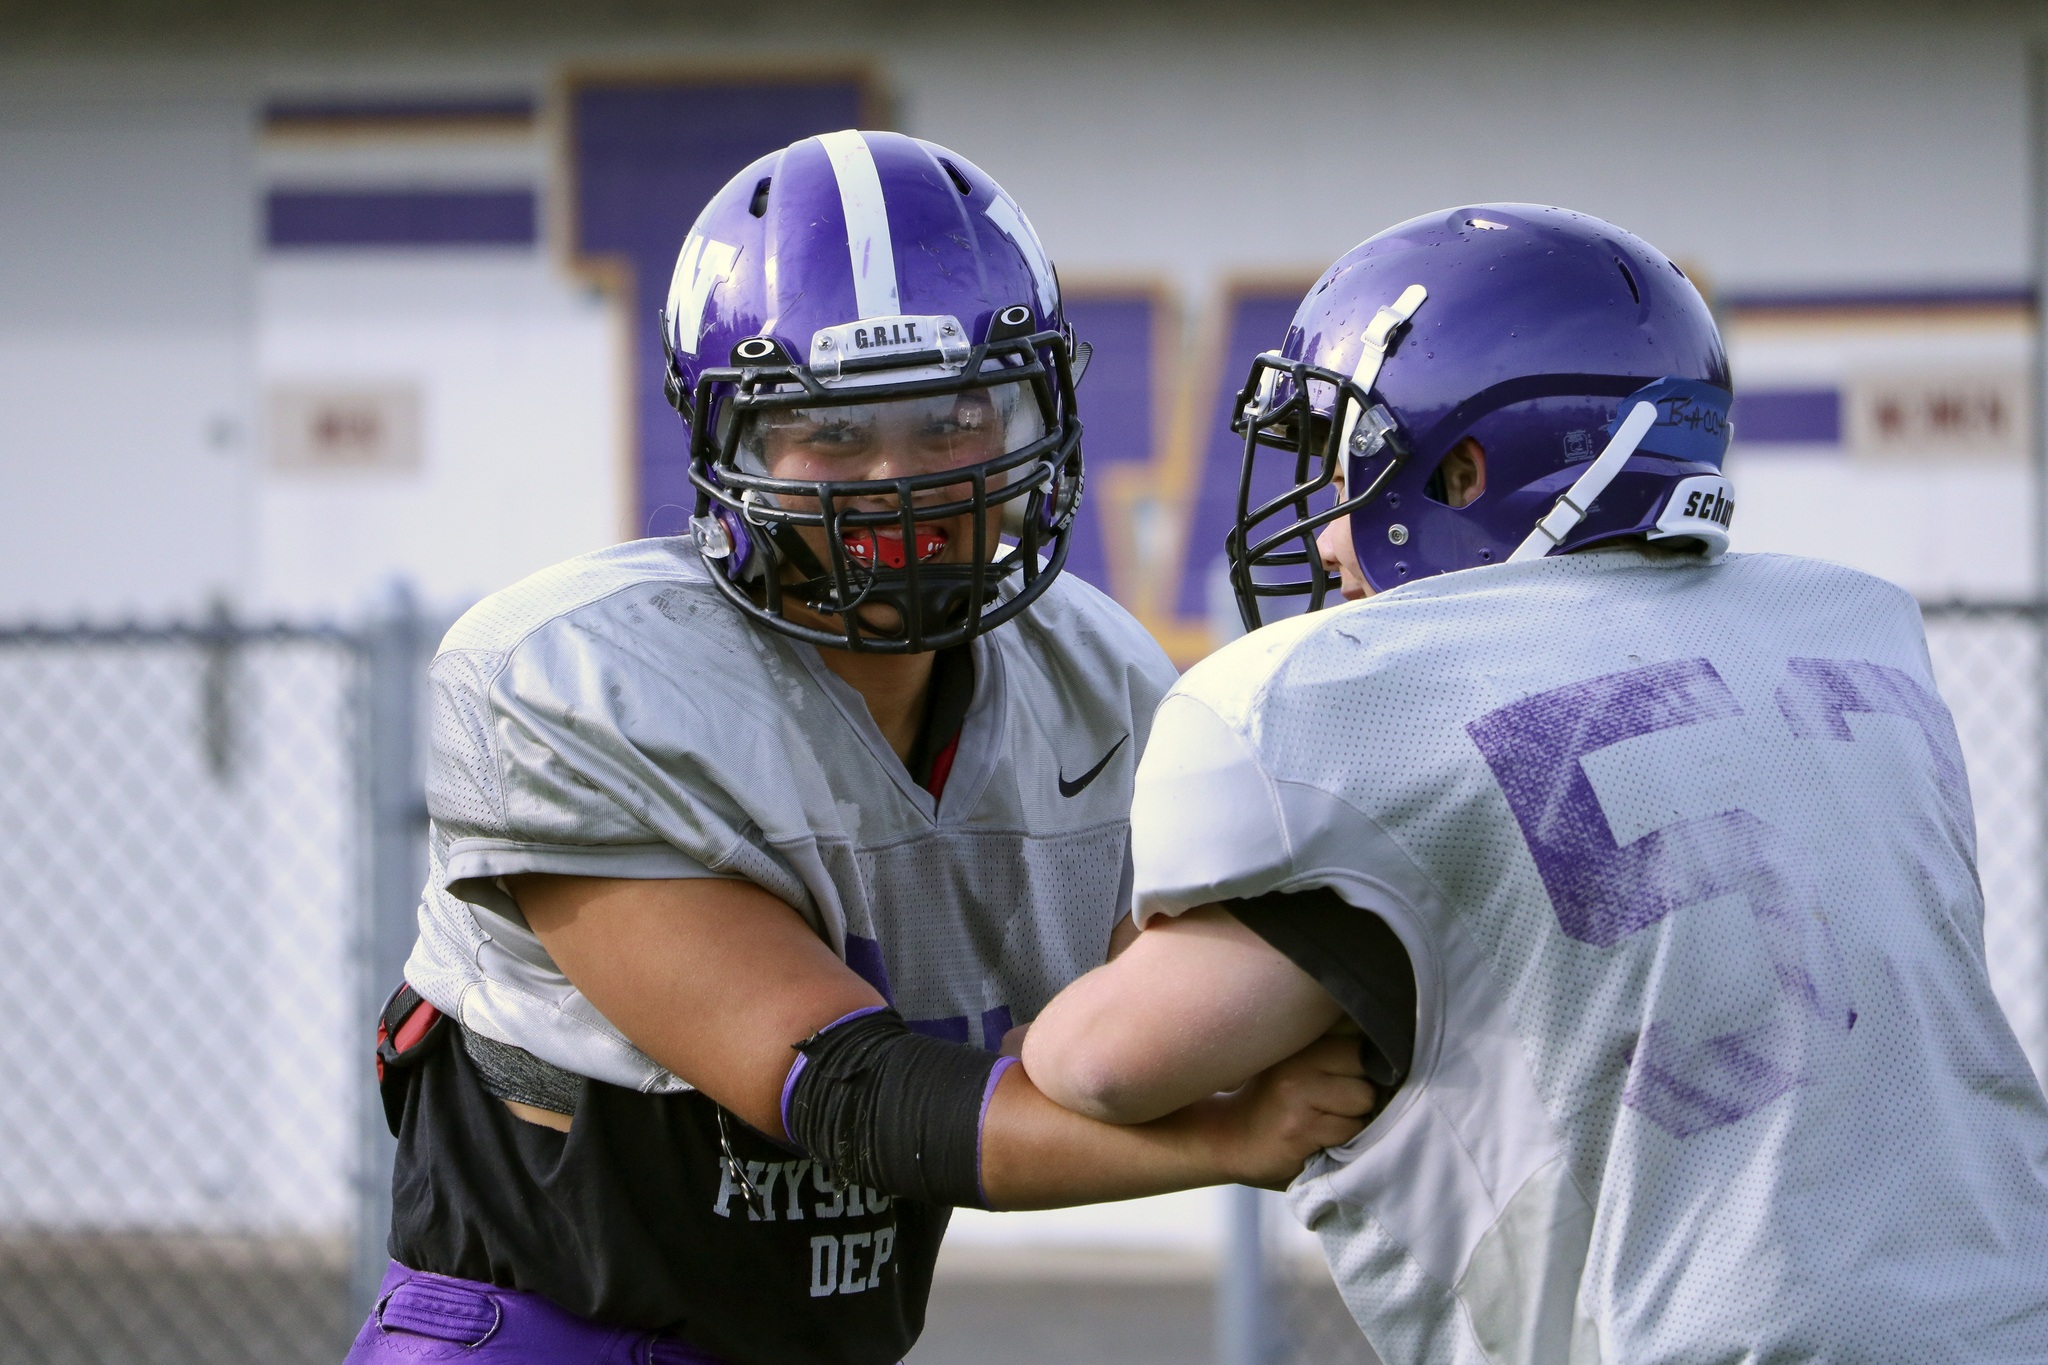 Lake Washington senior Jackie Castro takes part in drills during practice with her fellow lineman earlier this season. Castro has been part of the program since she was a freshman